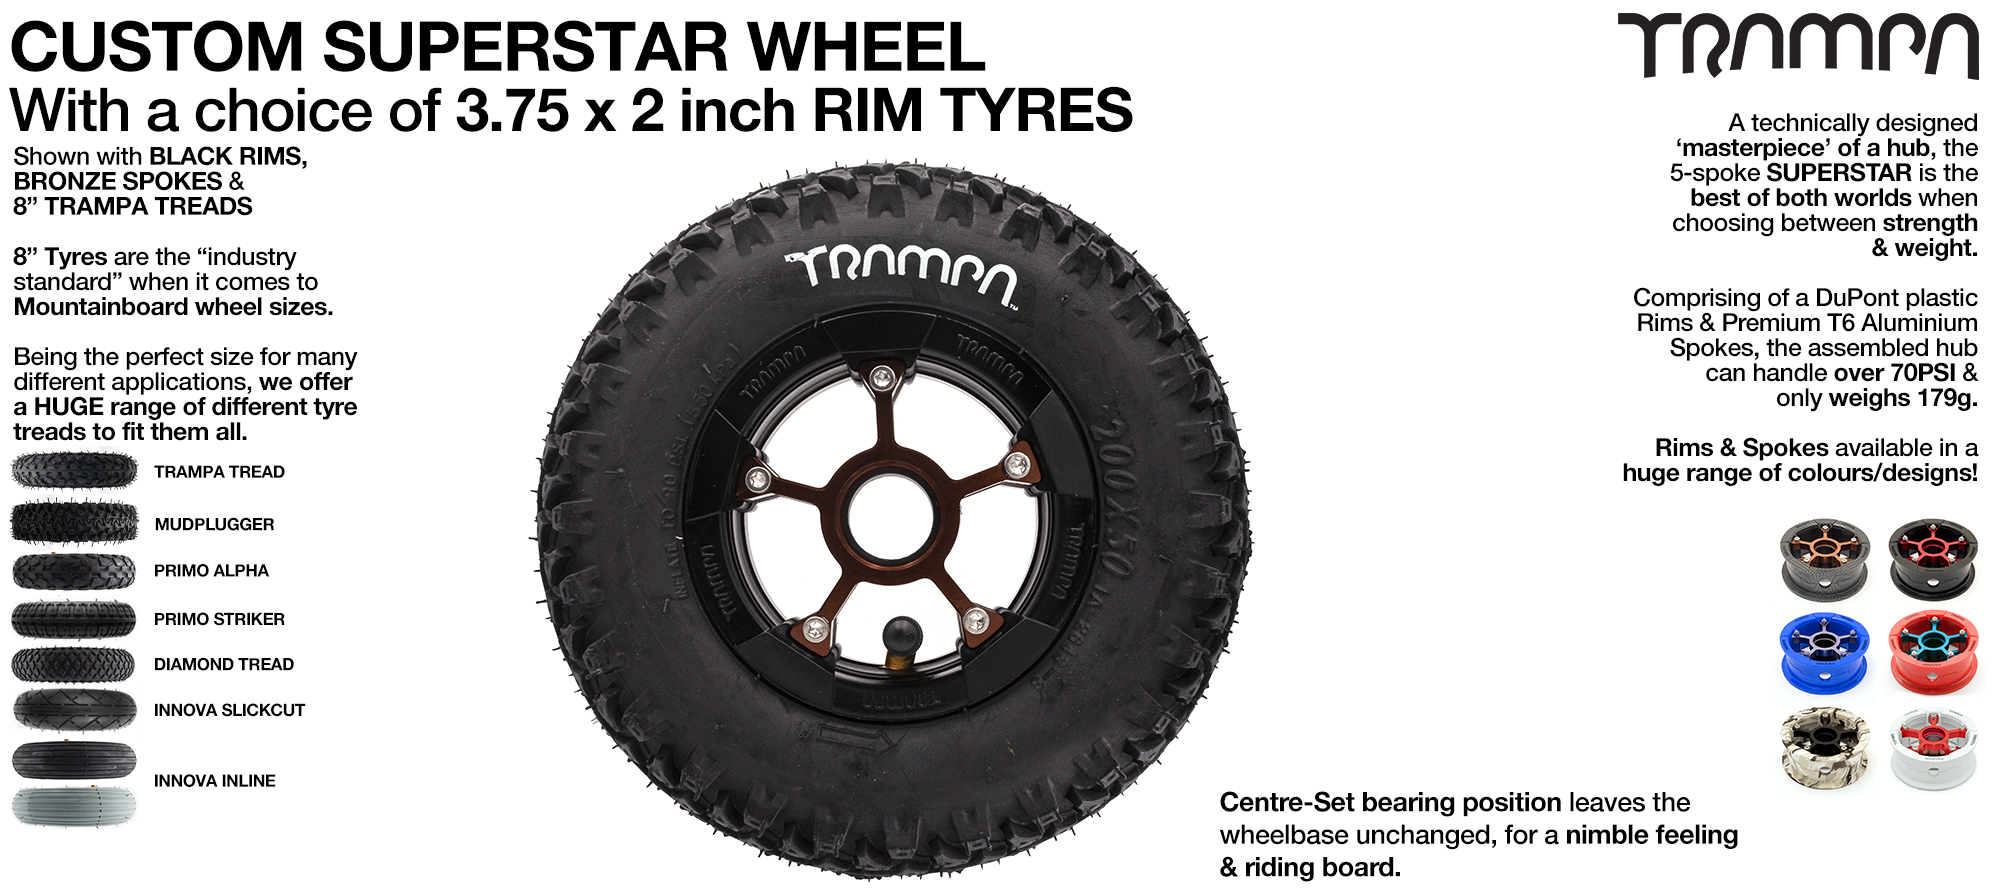 SUPERSTAR WHEELS showing with 5 Inch GUMMY Tyres 3.75 x 2 Inch! Build the SUPERSTAR wheel of your dreams!! Any combination possible up to 8 inch Tyres